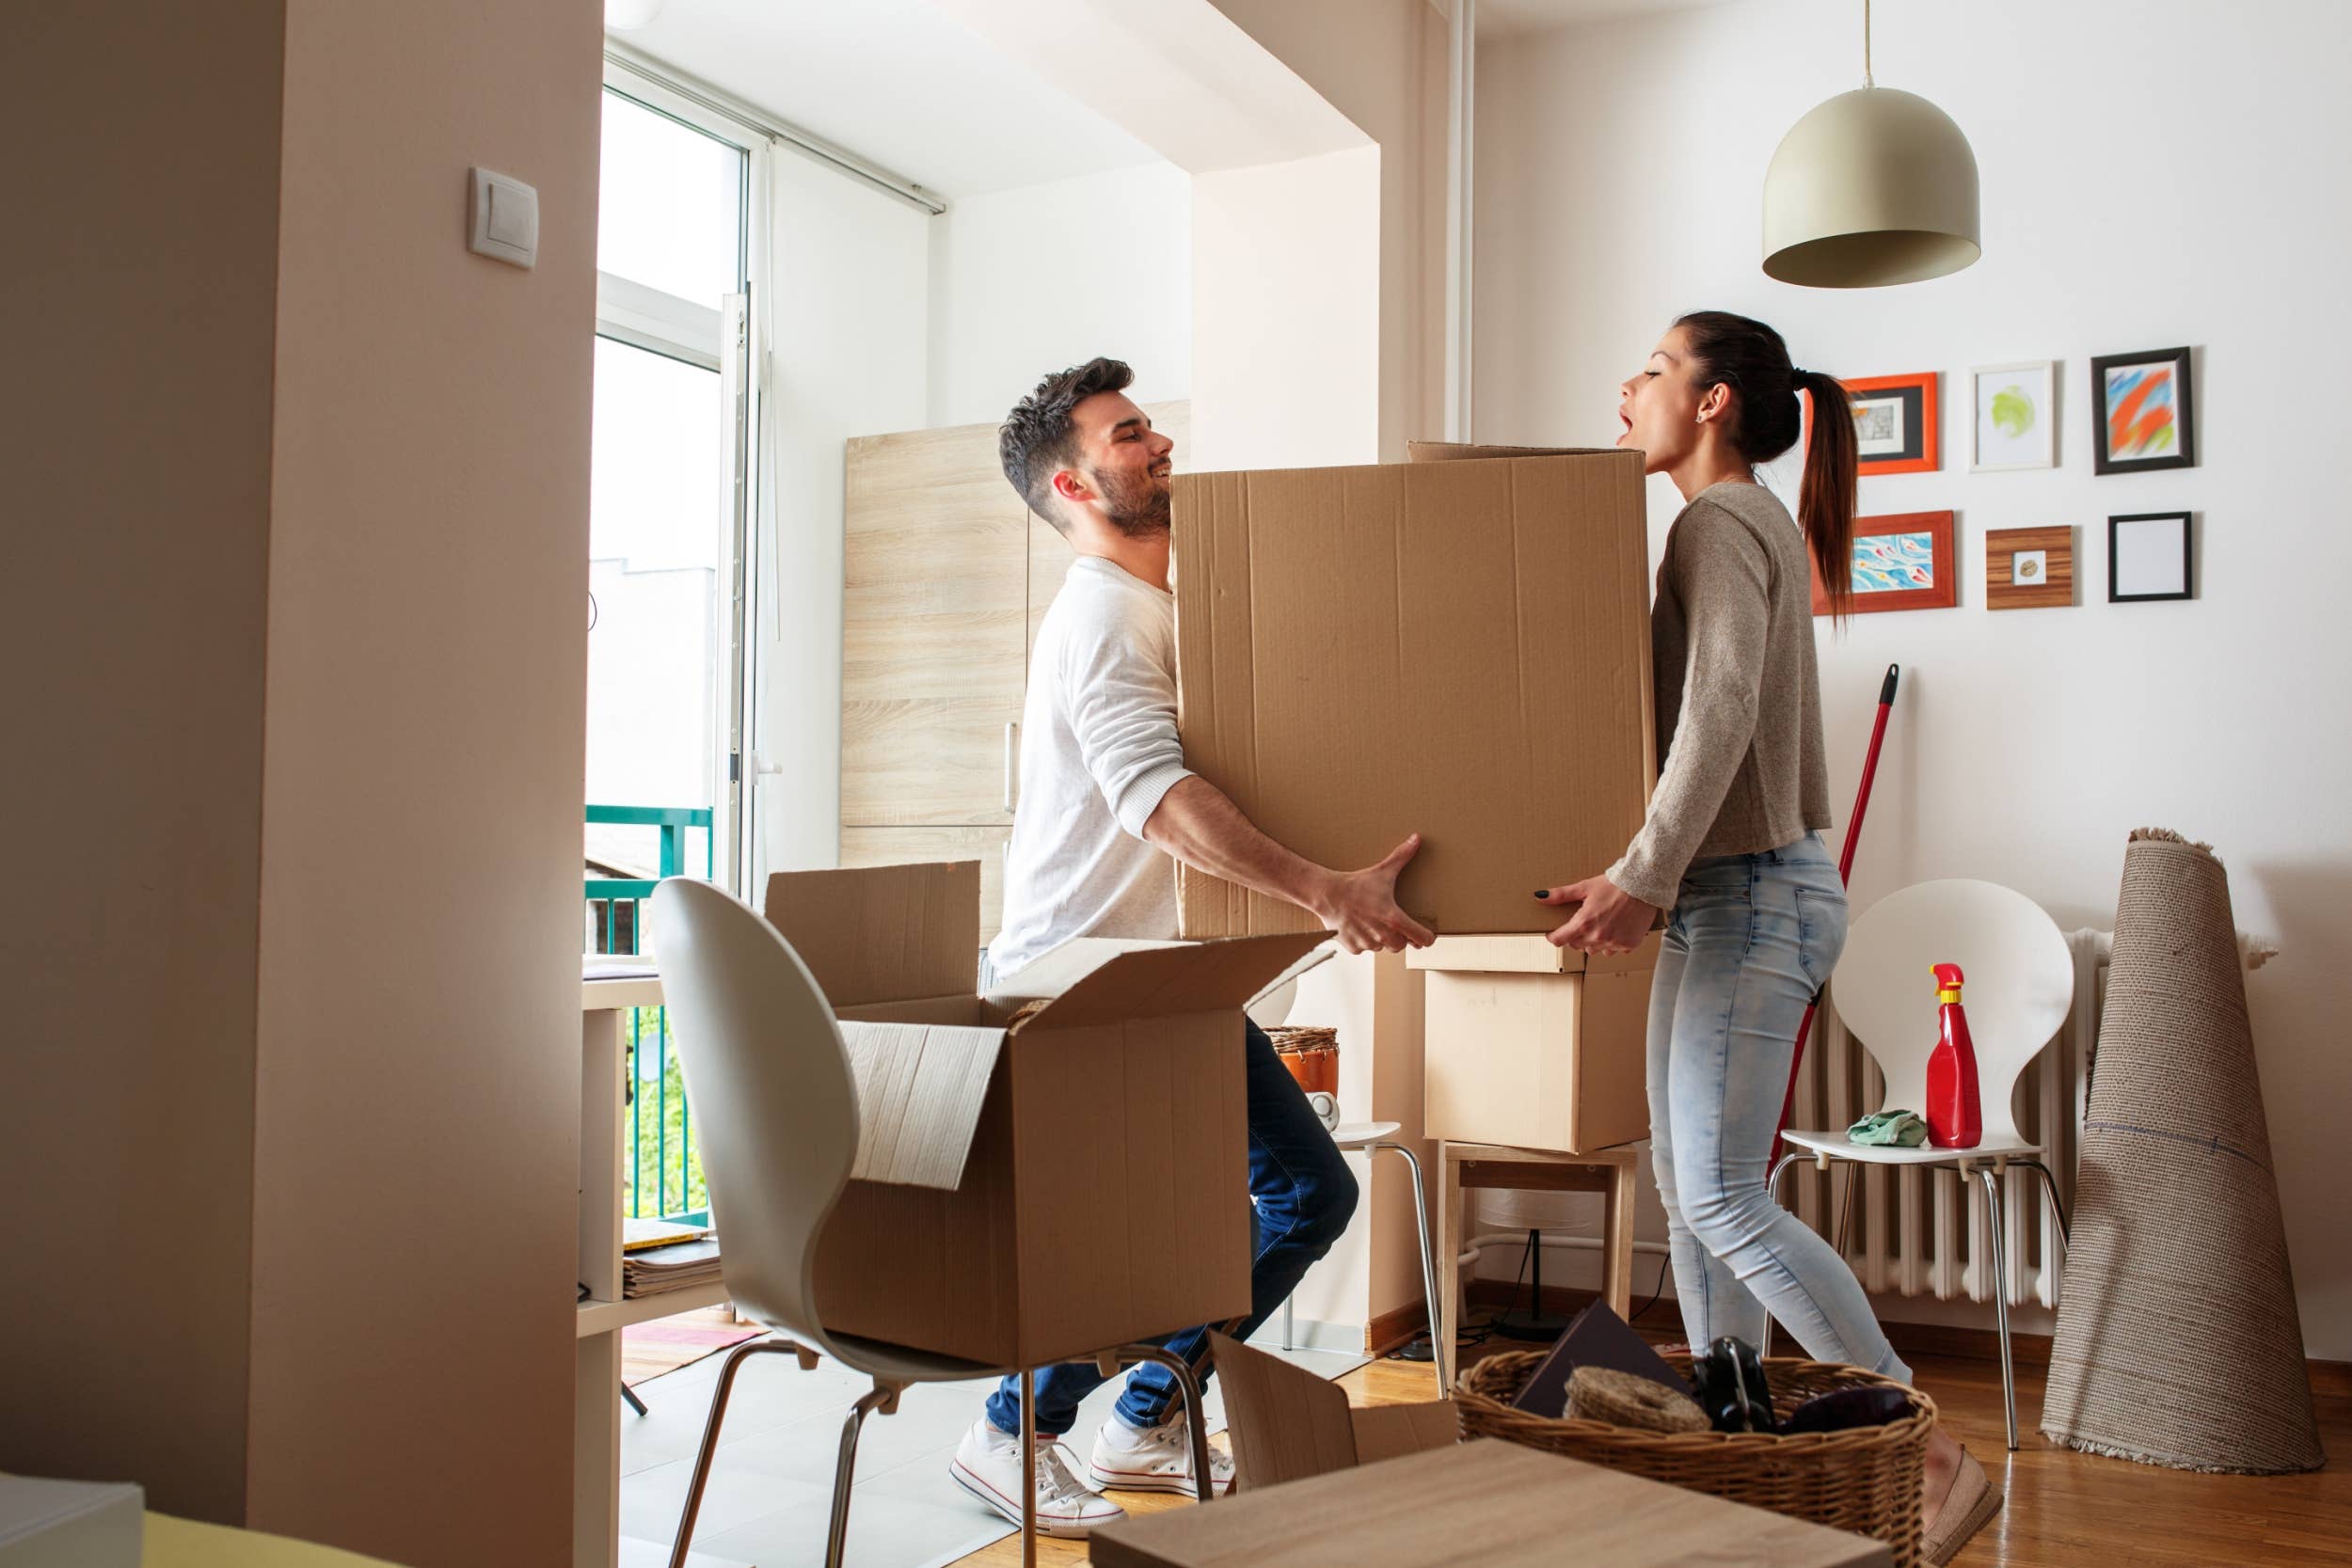 Completed Your College? Pros and Cons of Relocating Your Home after College